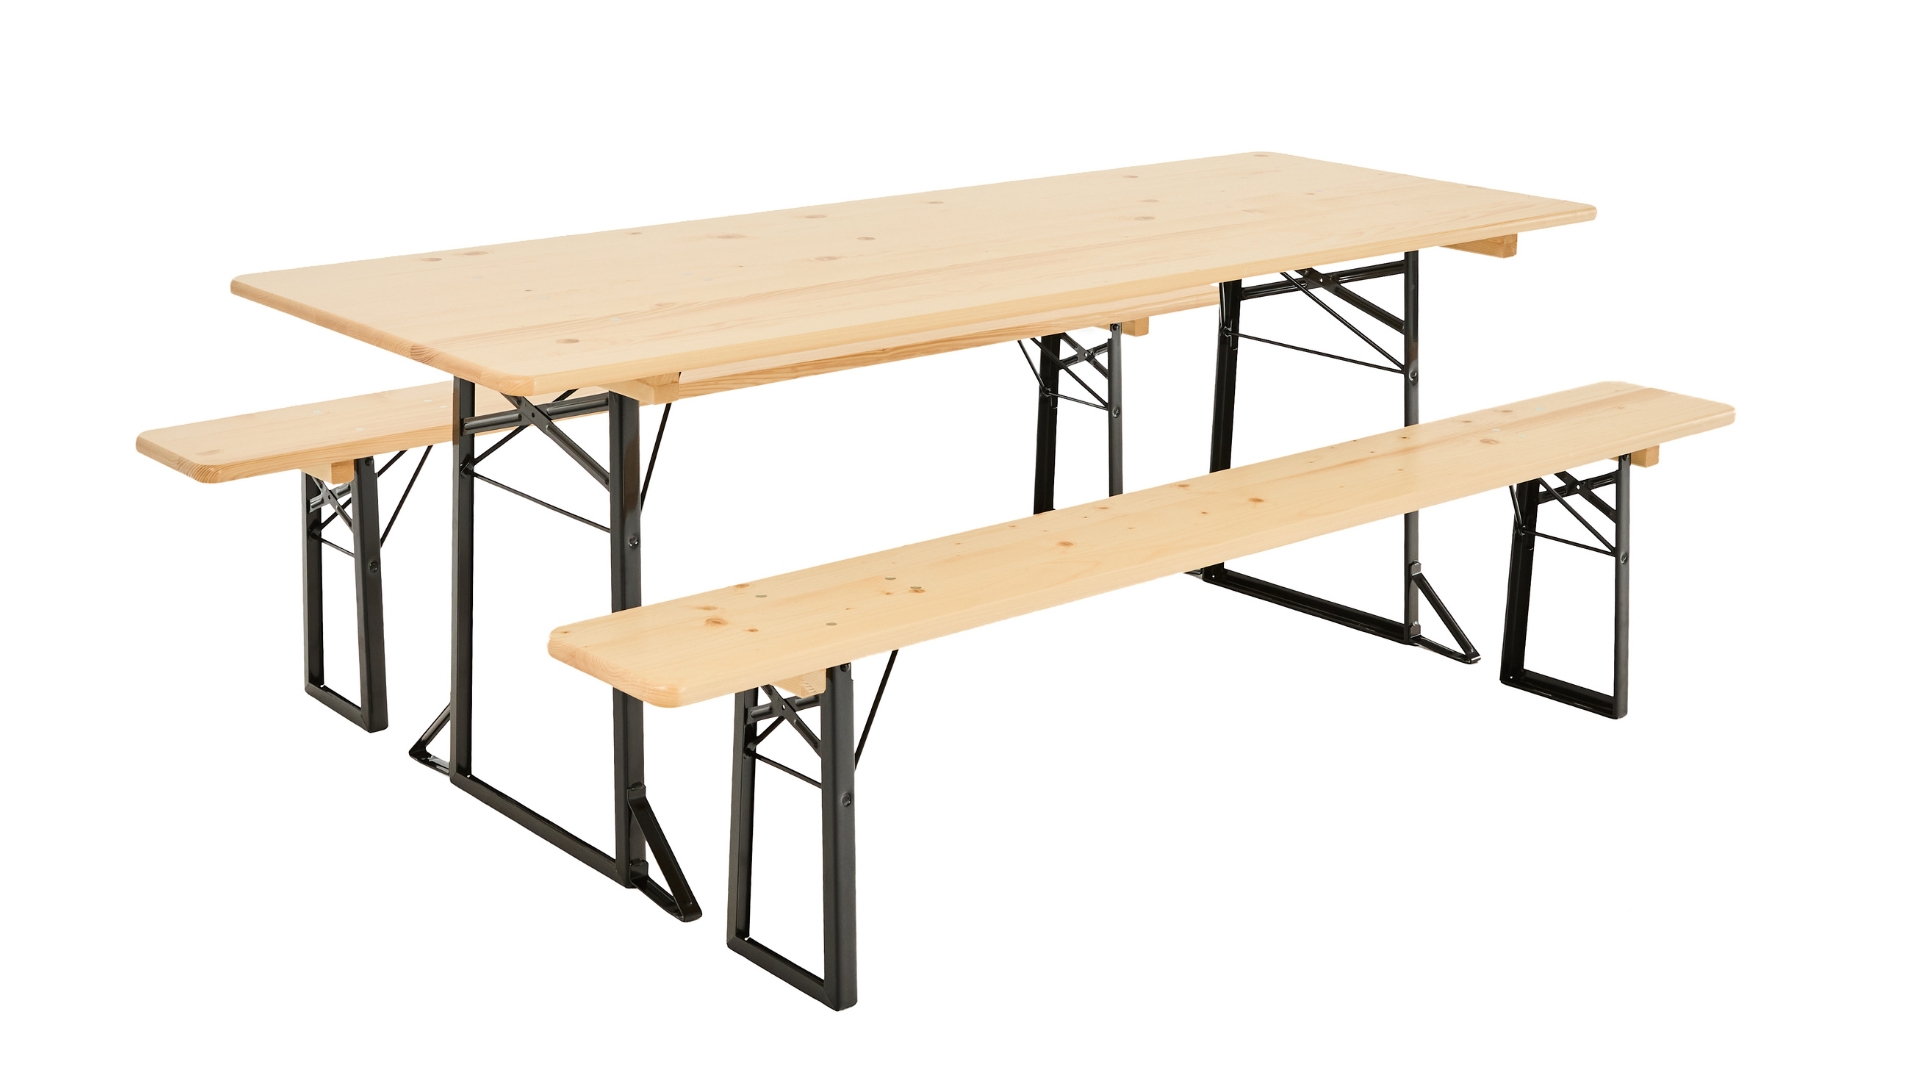 The 75 cm wide beer garden table sets in natural.